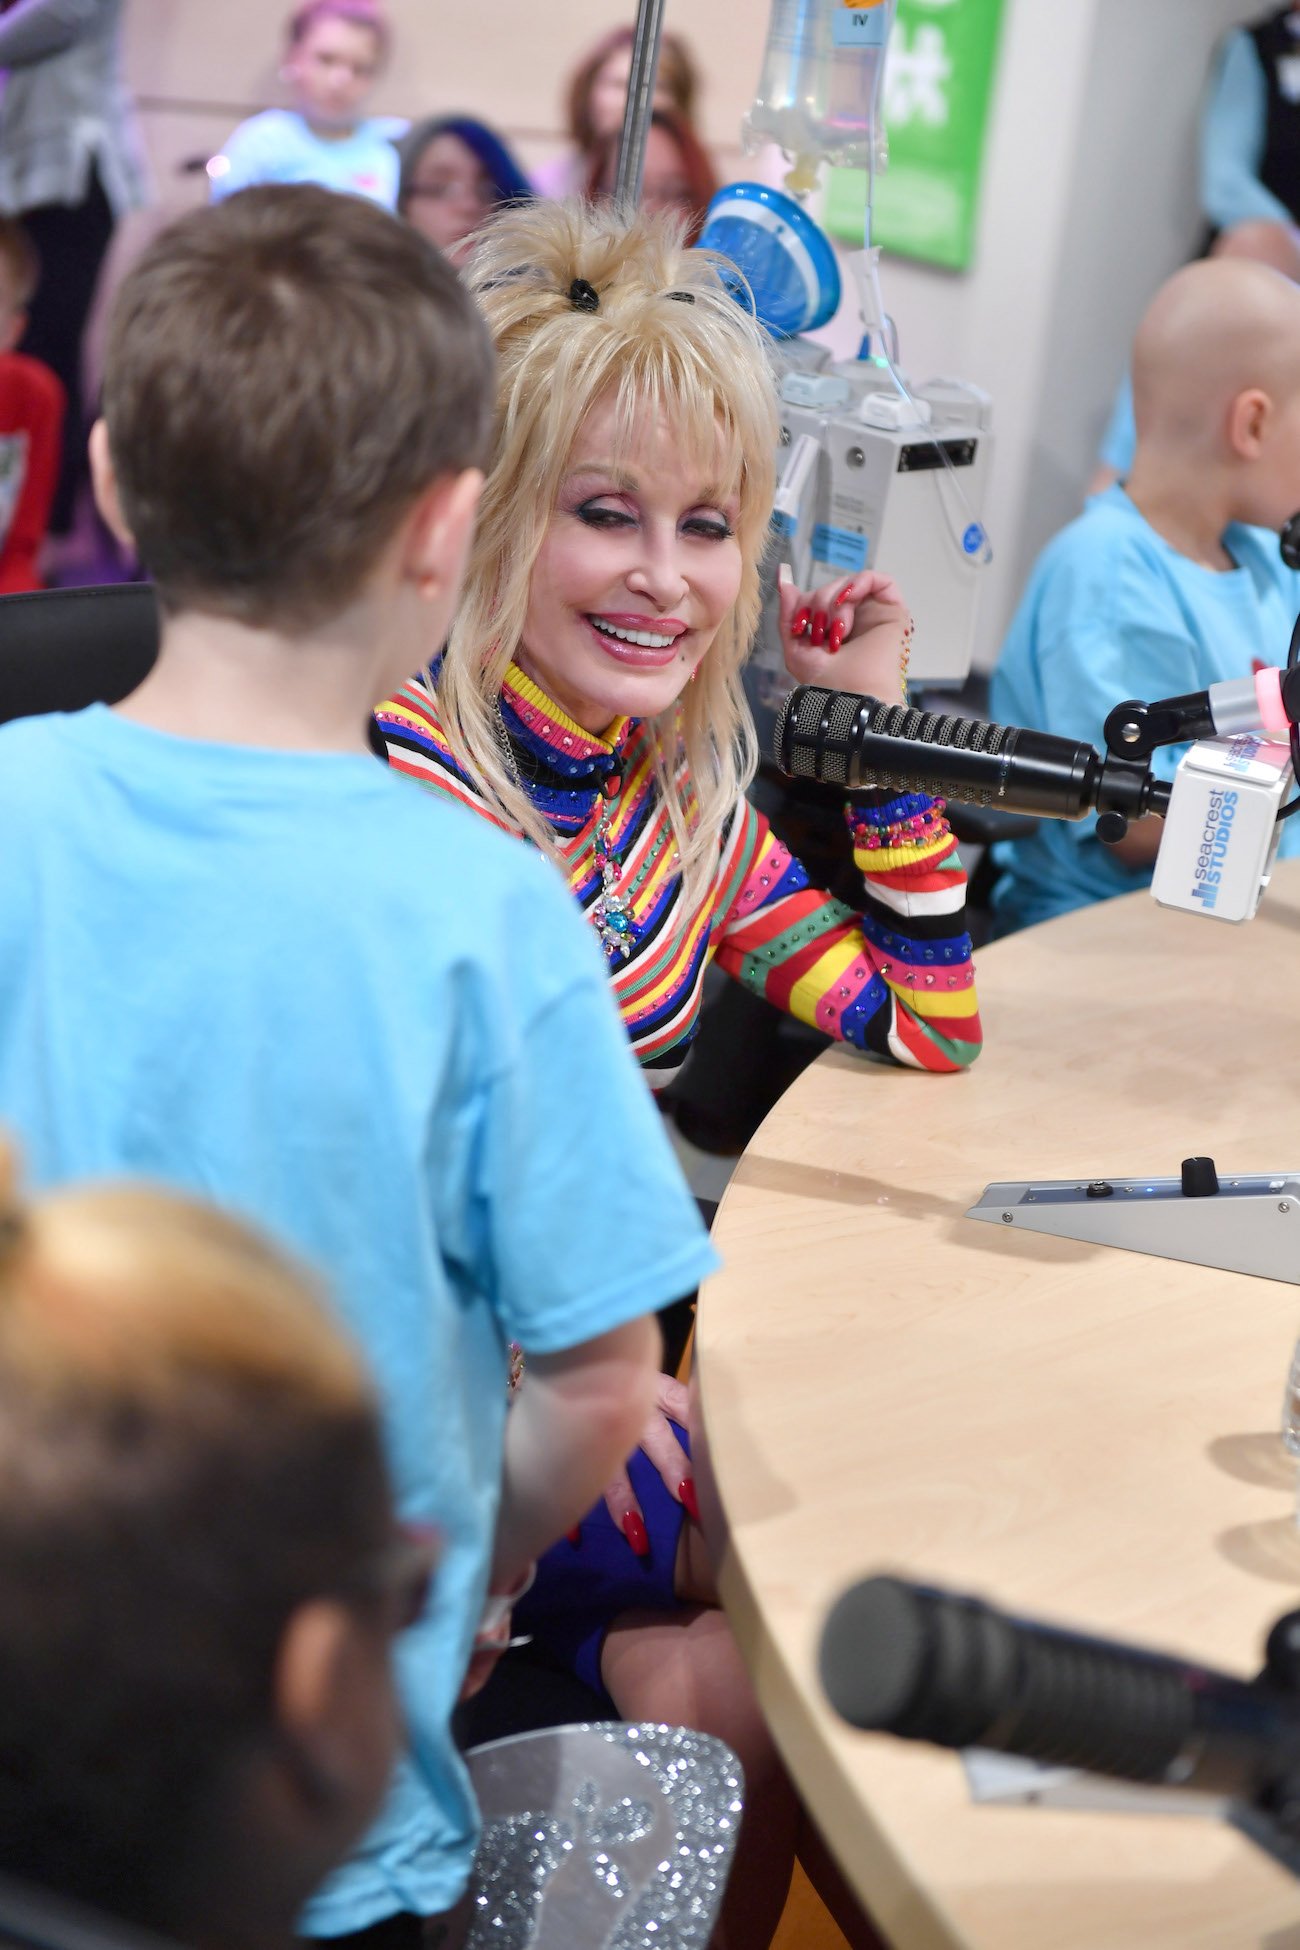 Dolly Parton smiles as she speaks into a microphone and looks at a boy standing next to her